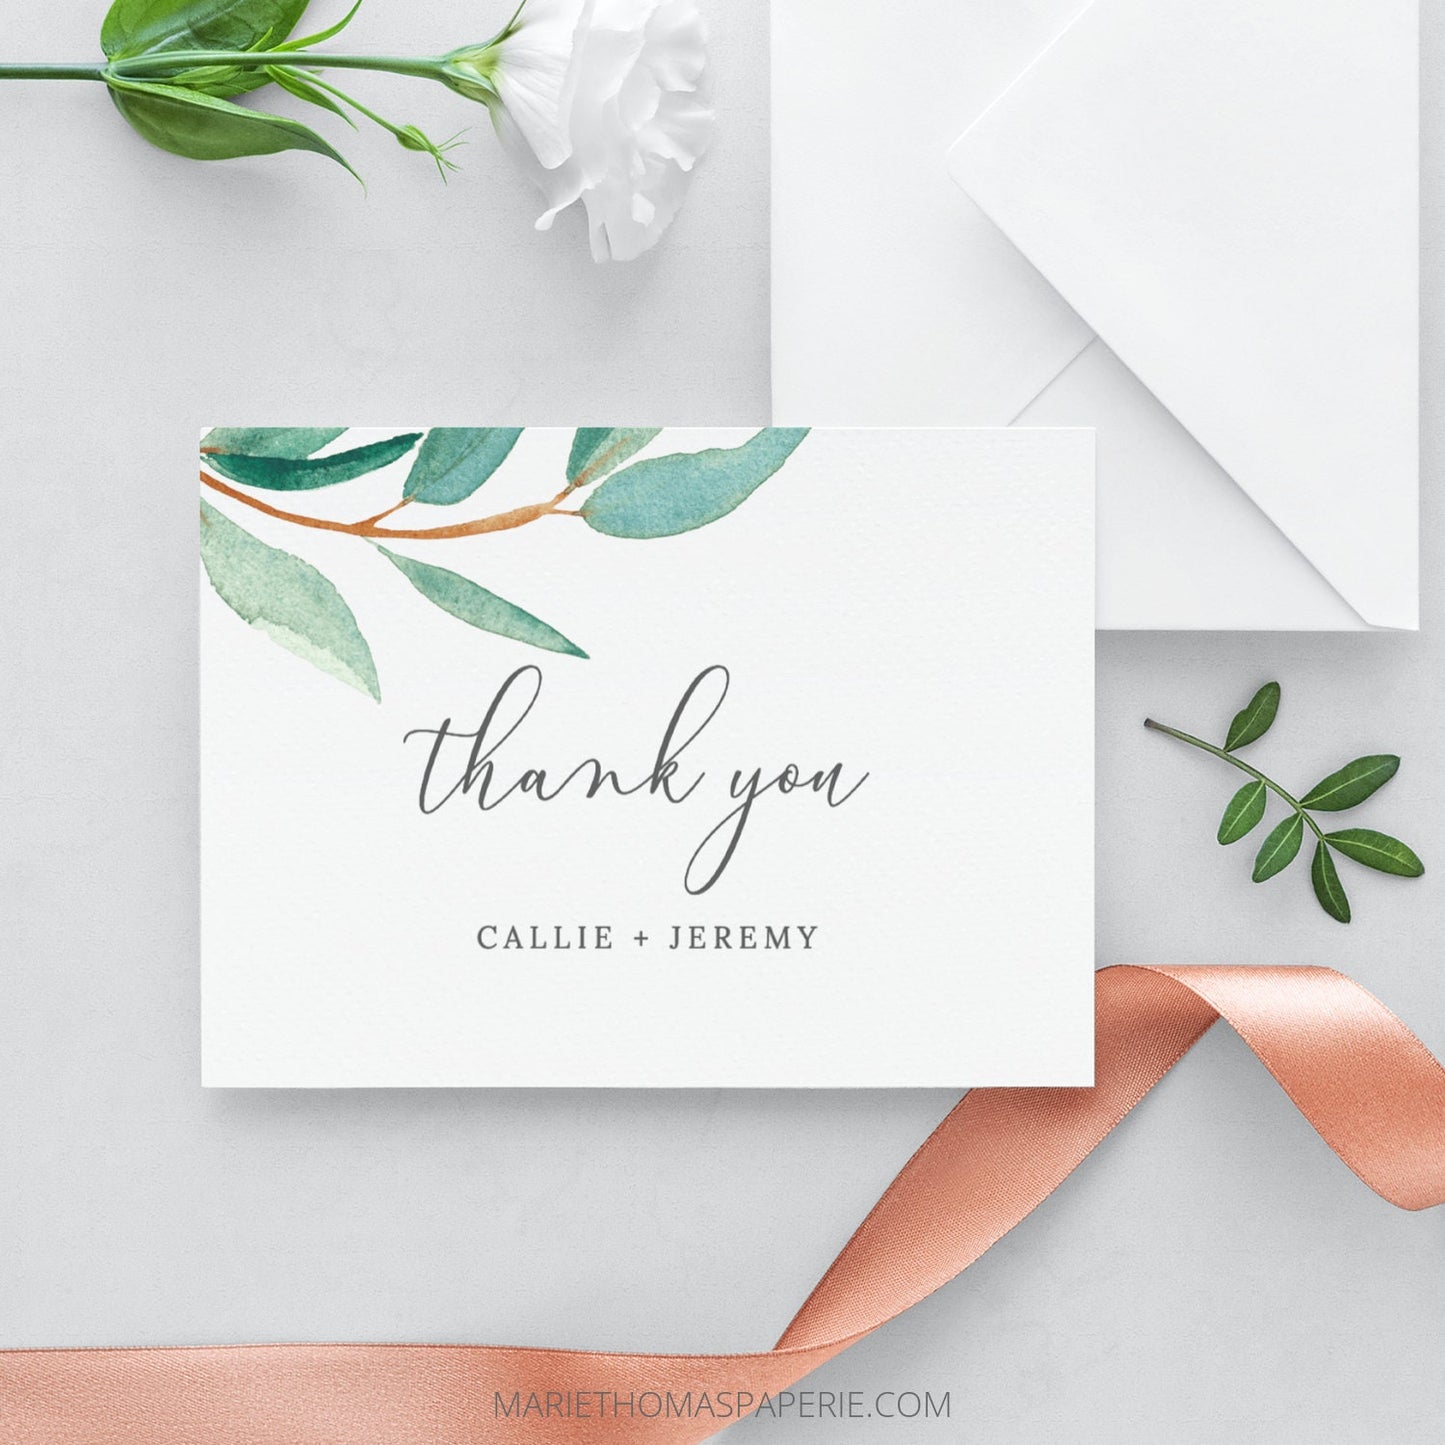 Editable Wedding Thank You Cards Cards Bridal Shower Thank You Cards Modern Script Greenery Template